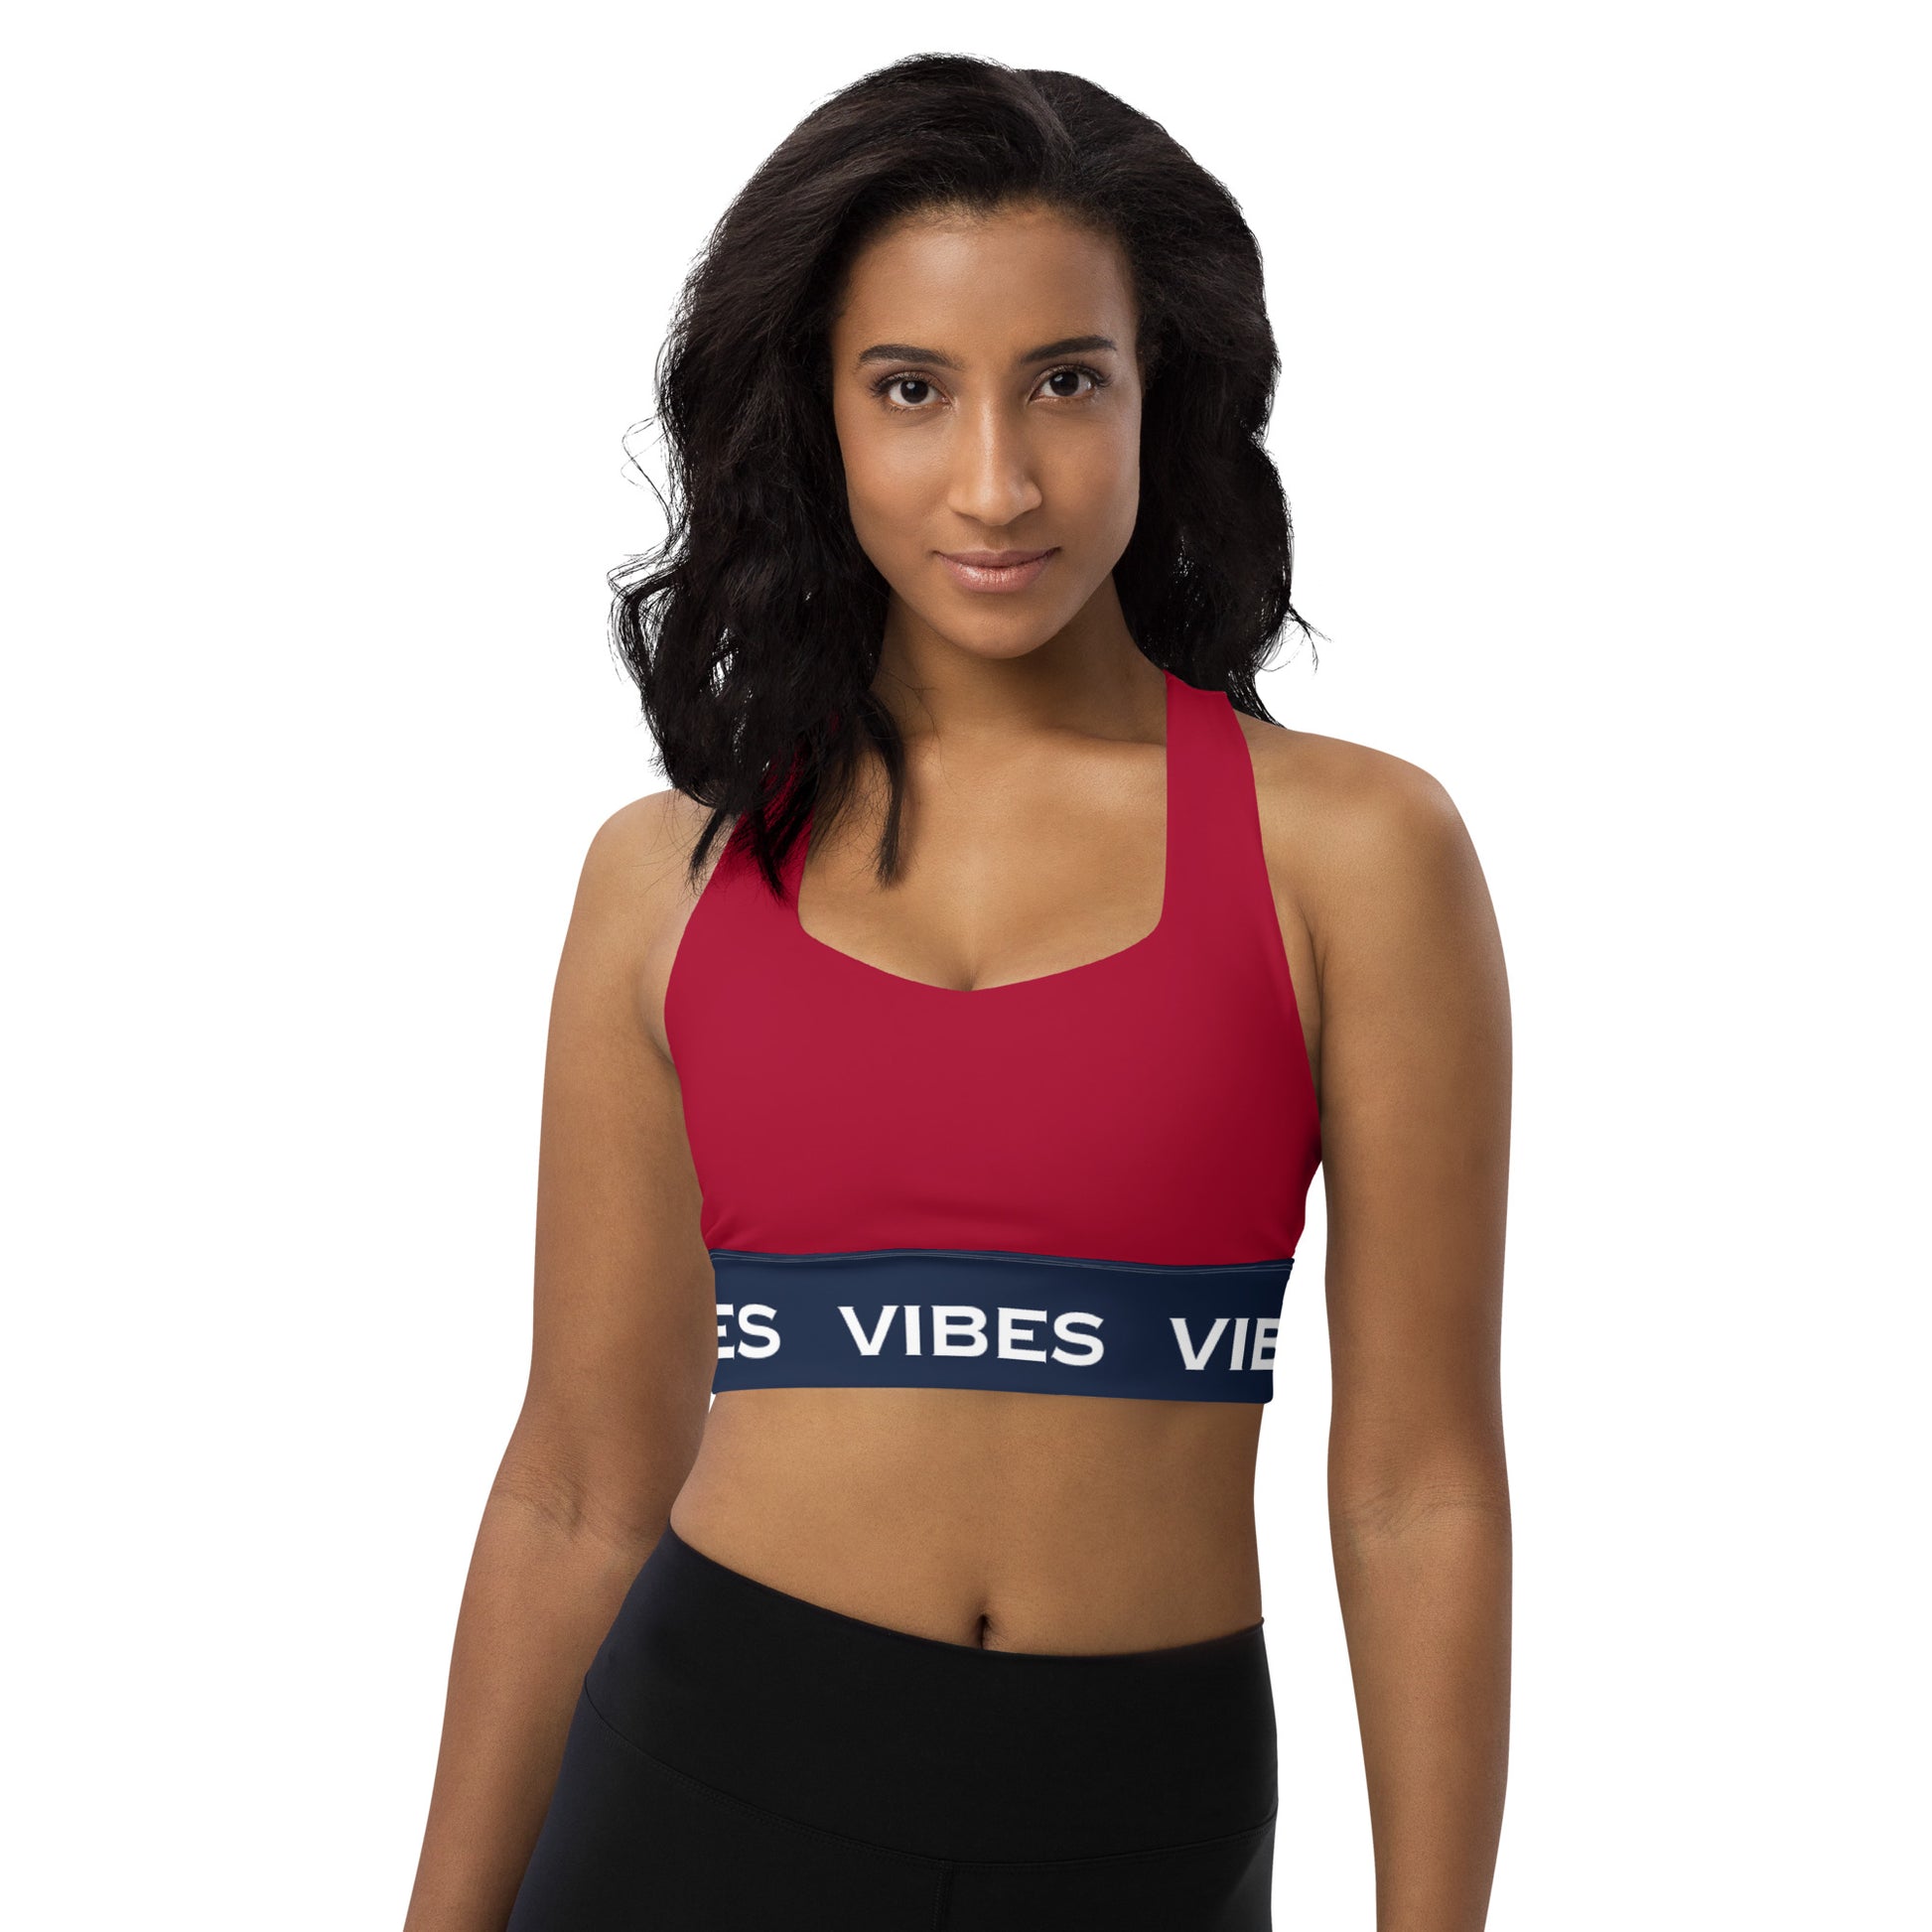 TIME OF VIBES - Longline sports bra (Red/Blue) - €49.00